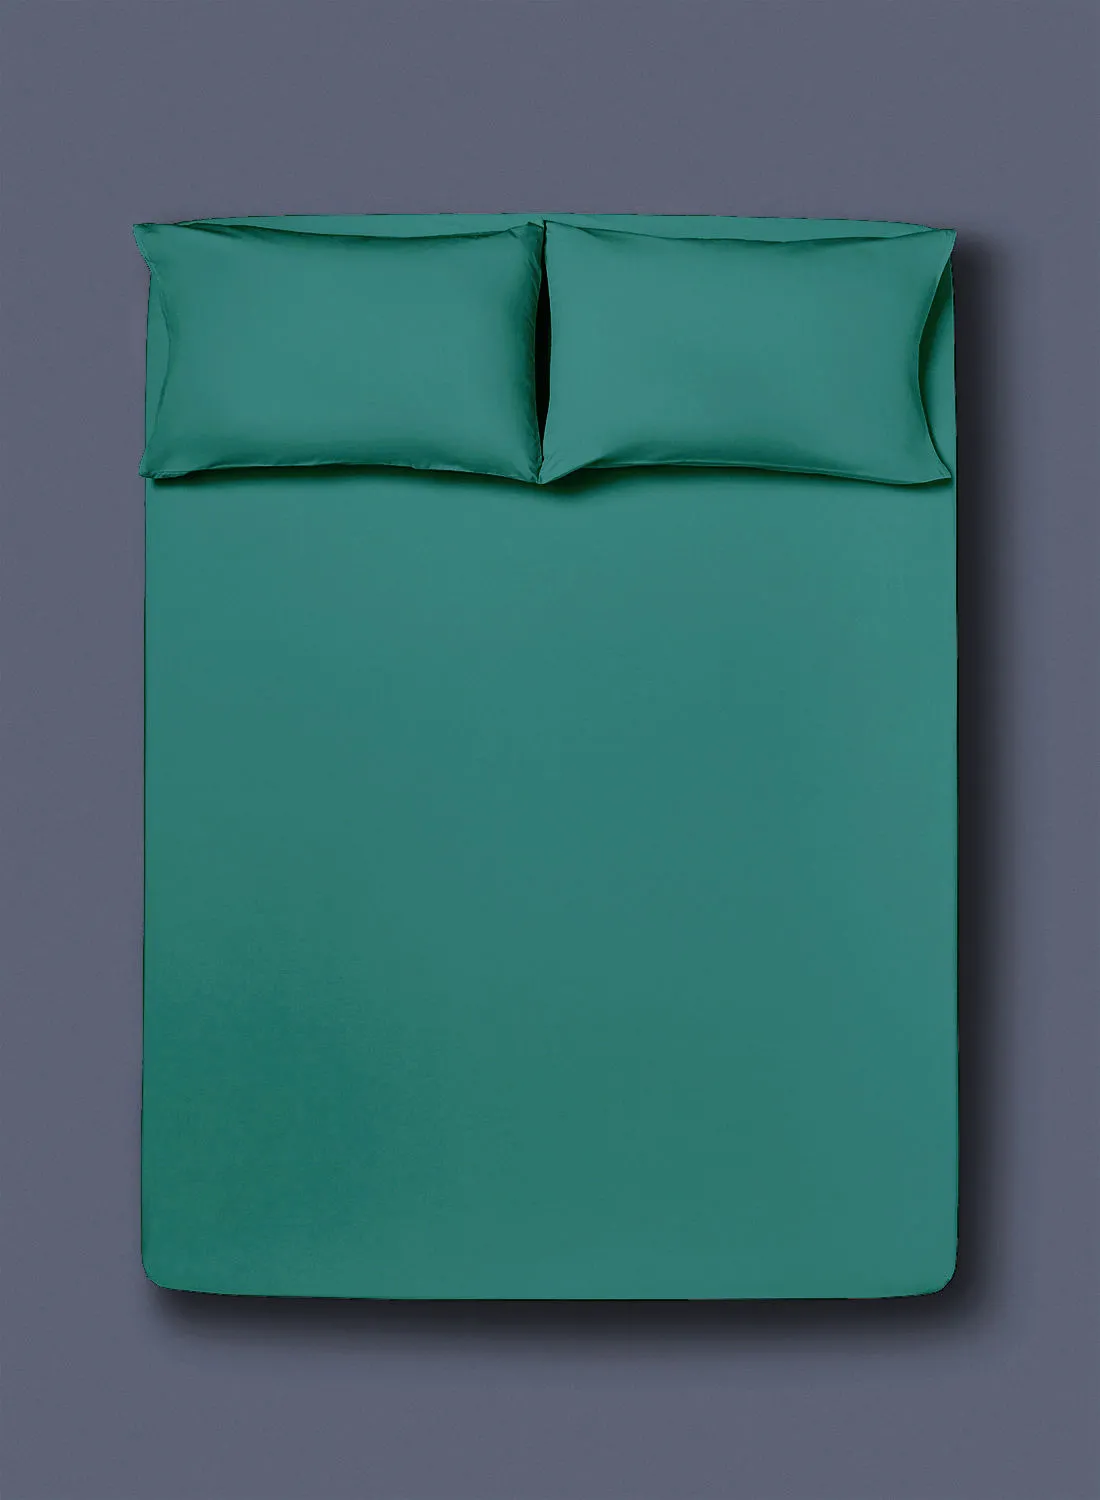 Amal Fitted Bedsheet Set Super King Size  100% Cotton High Quality Light Weight Everyday Use 180 TC 1 Bed Sheet And 2 Pillow Cases Emerald Green Color